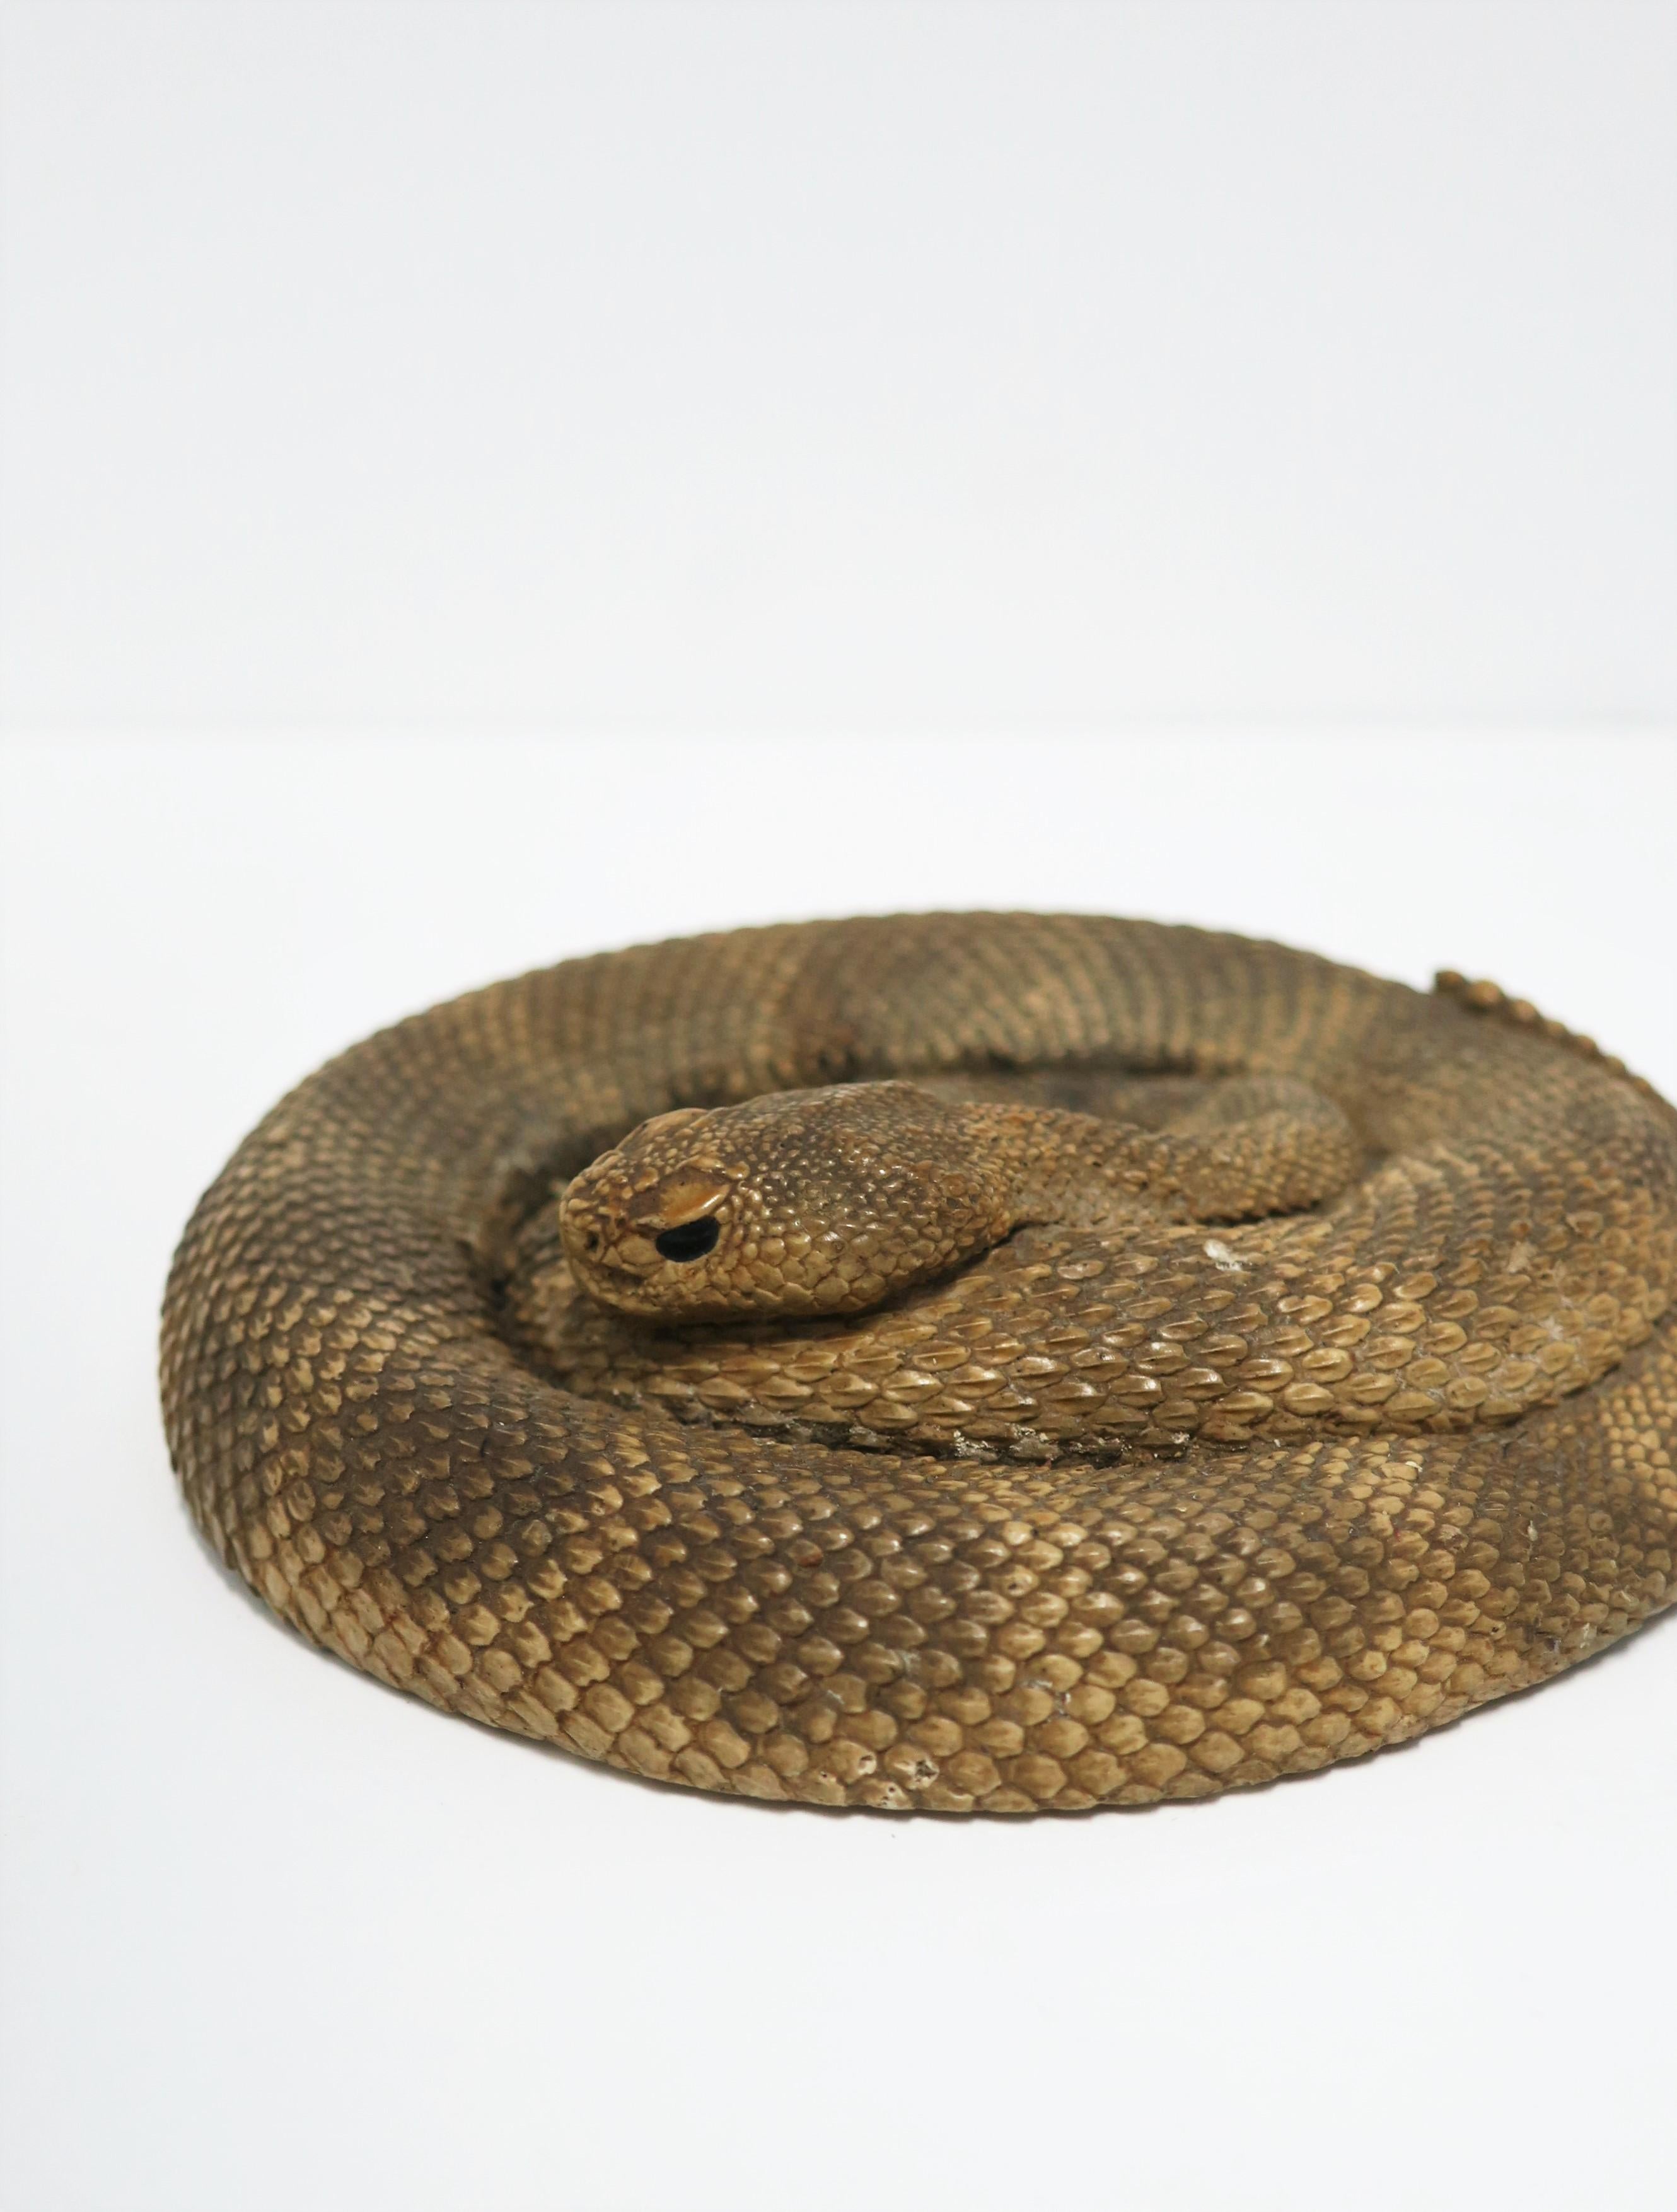 Coiled Rattle Snake, circa 1980s USA In Good Condition For Sale In New York, NY